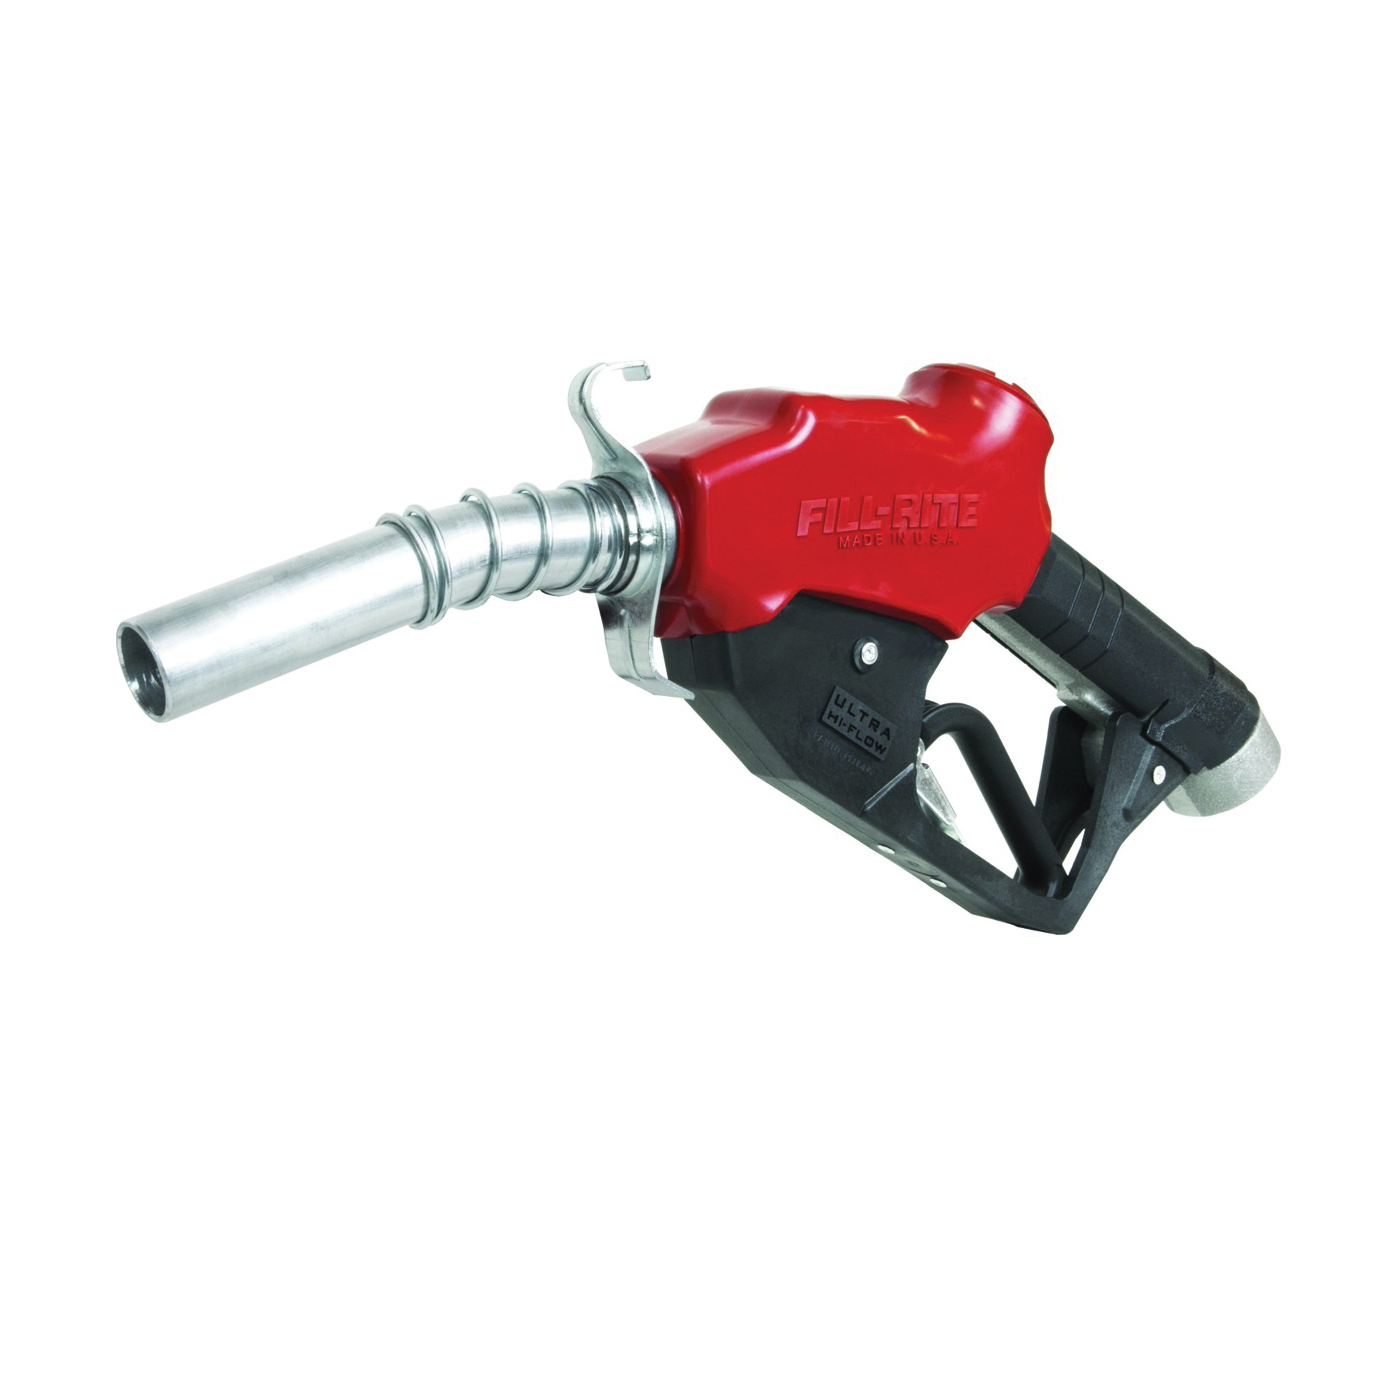 N100DAU13 Fuel Nozzle, 1 in, FNPT, 5 to 40 gpm, Aluminum, Red